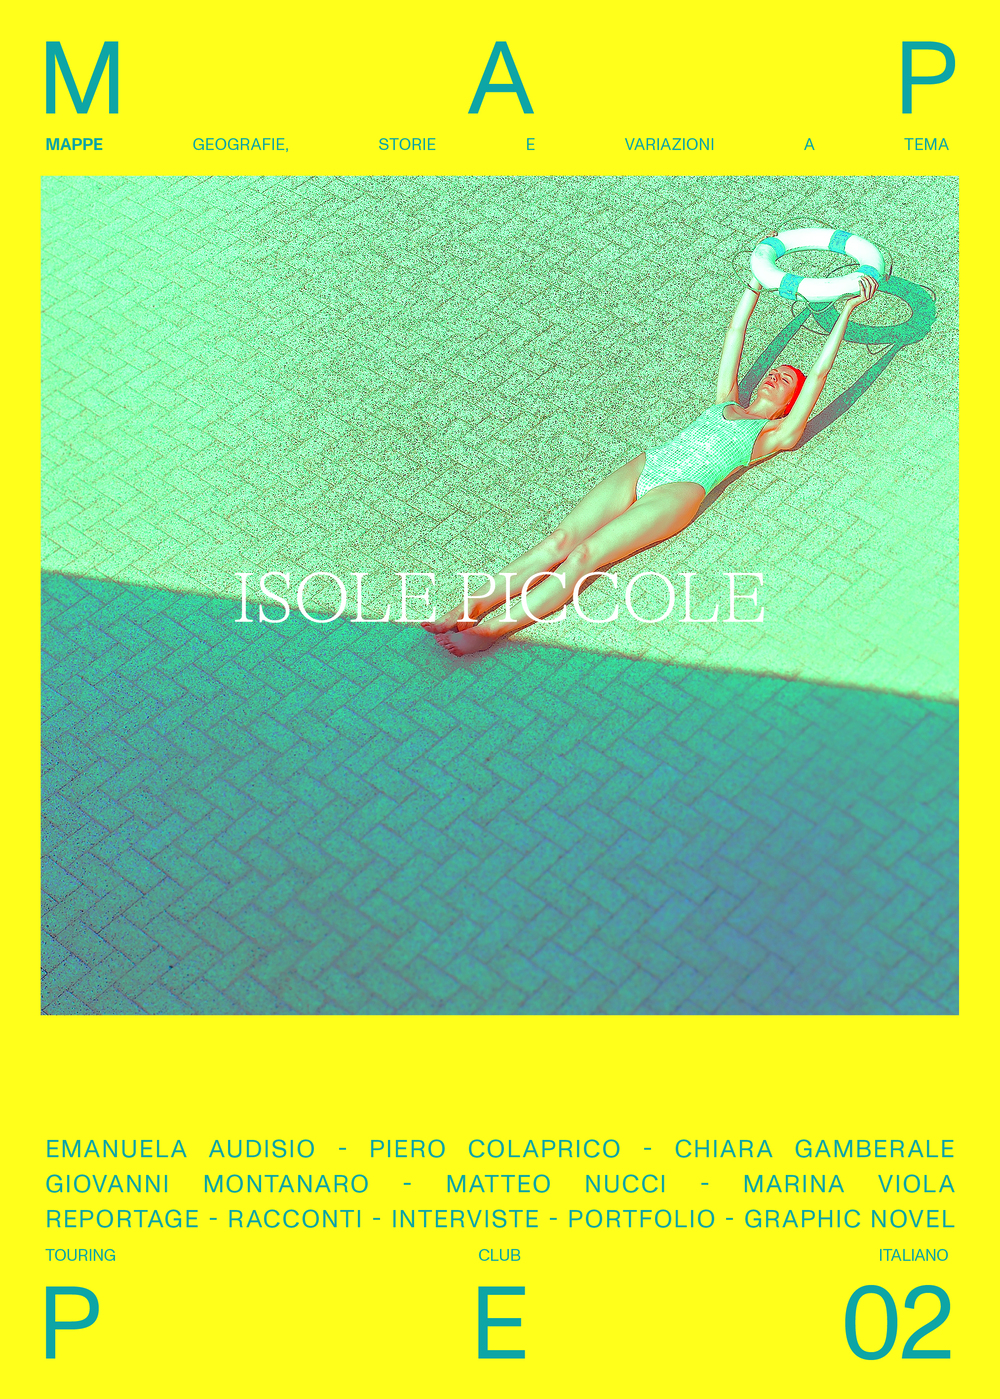 Touring club, isole piccole